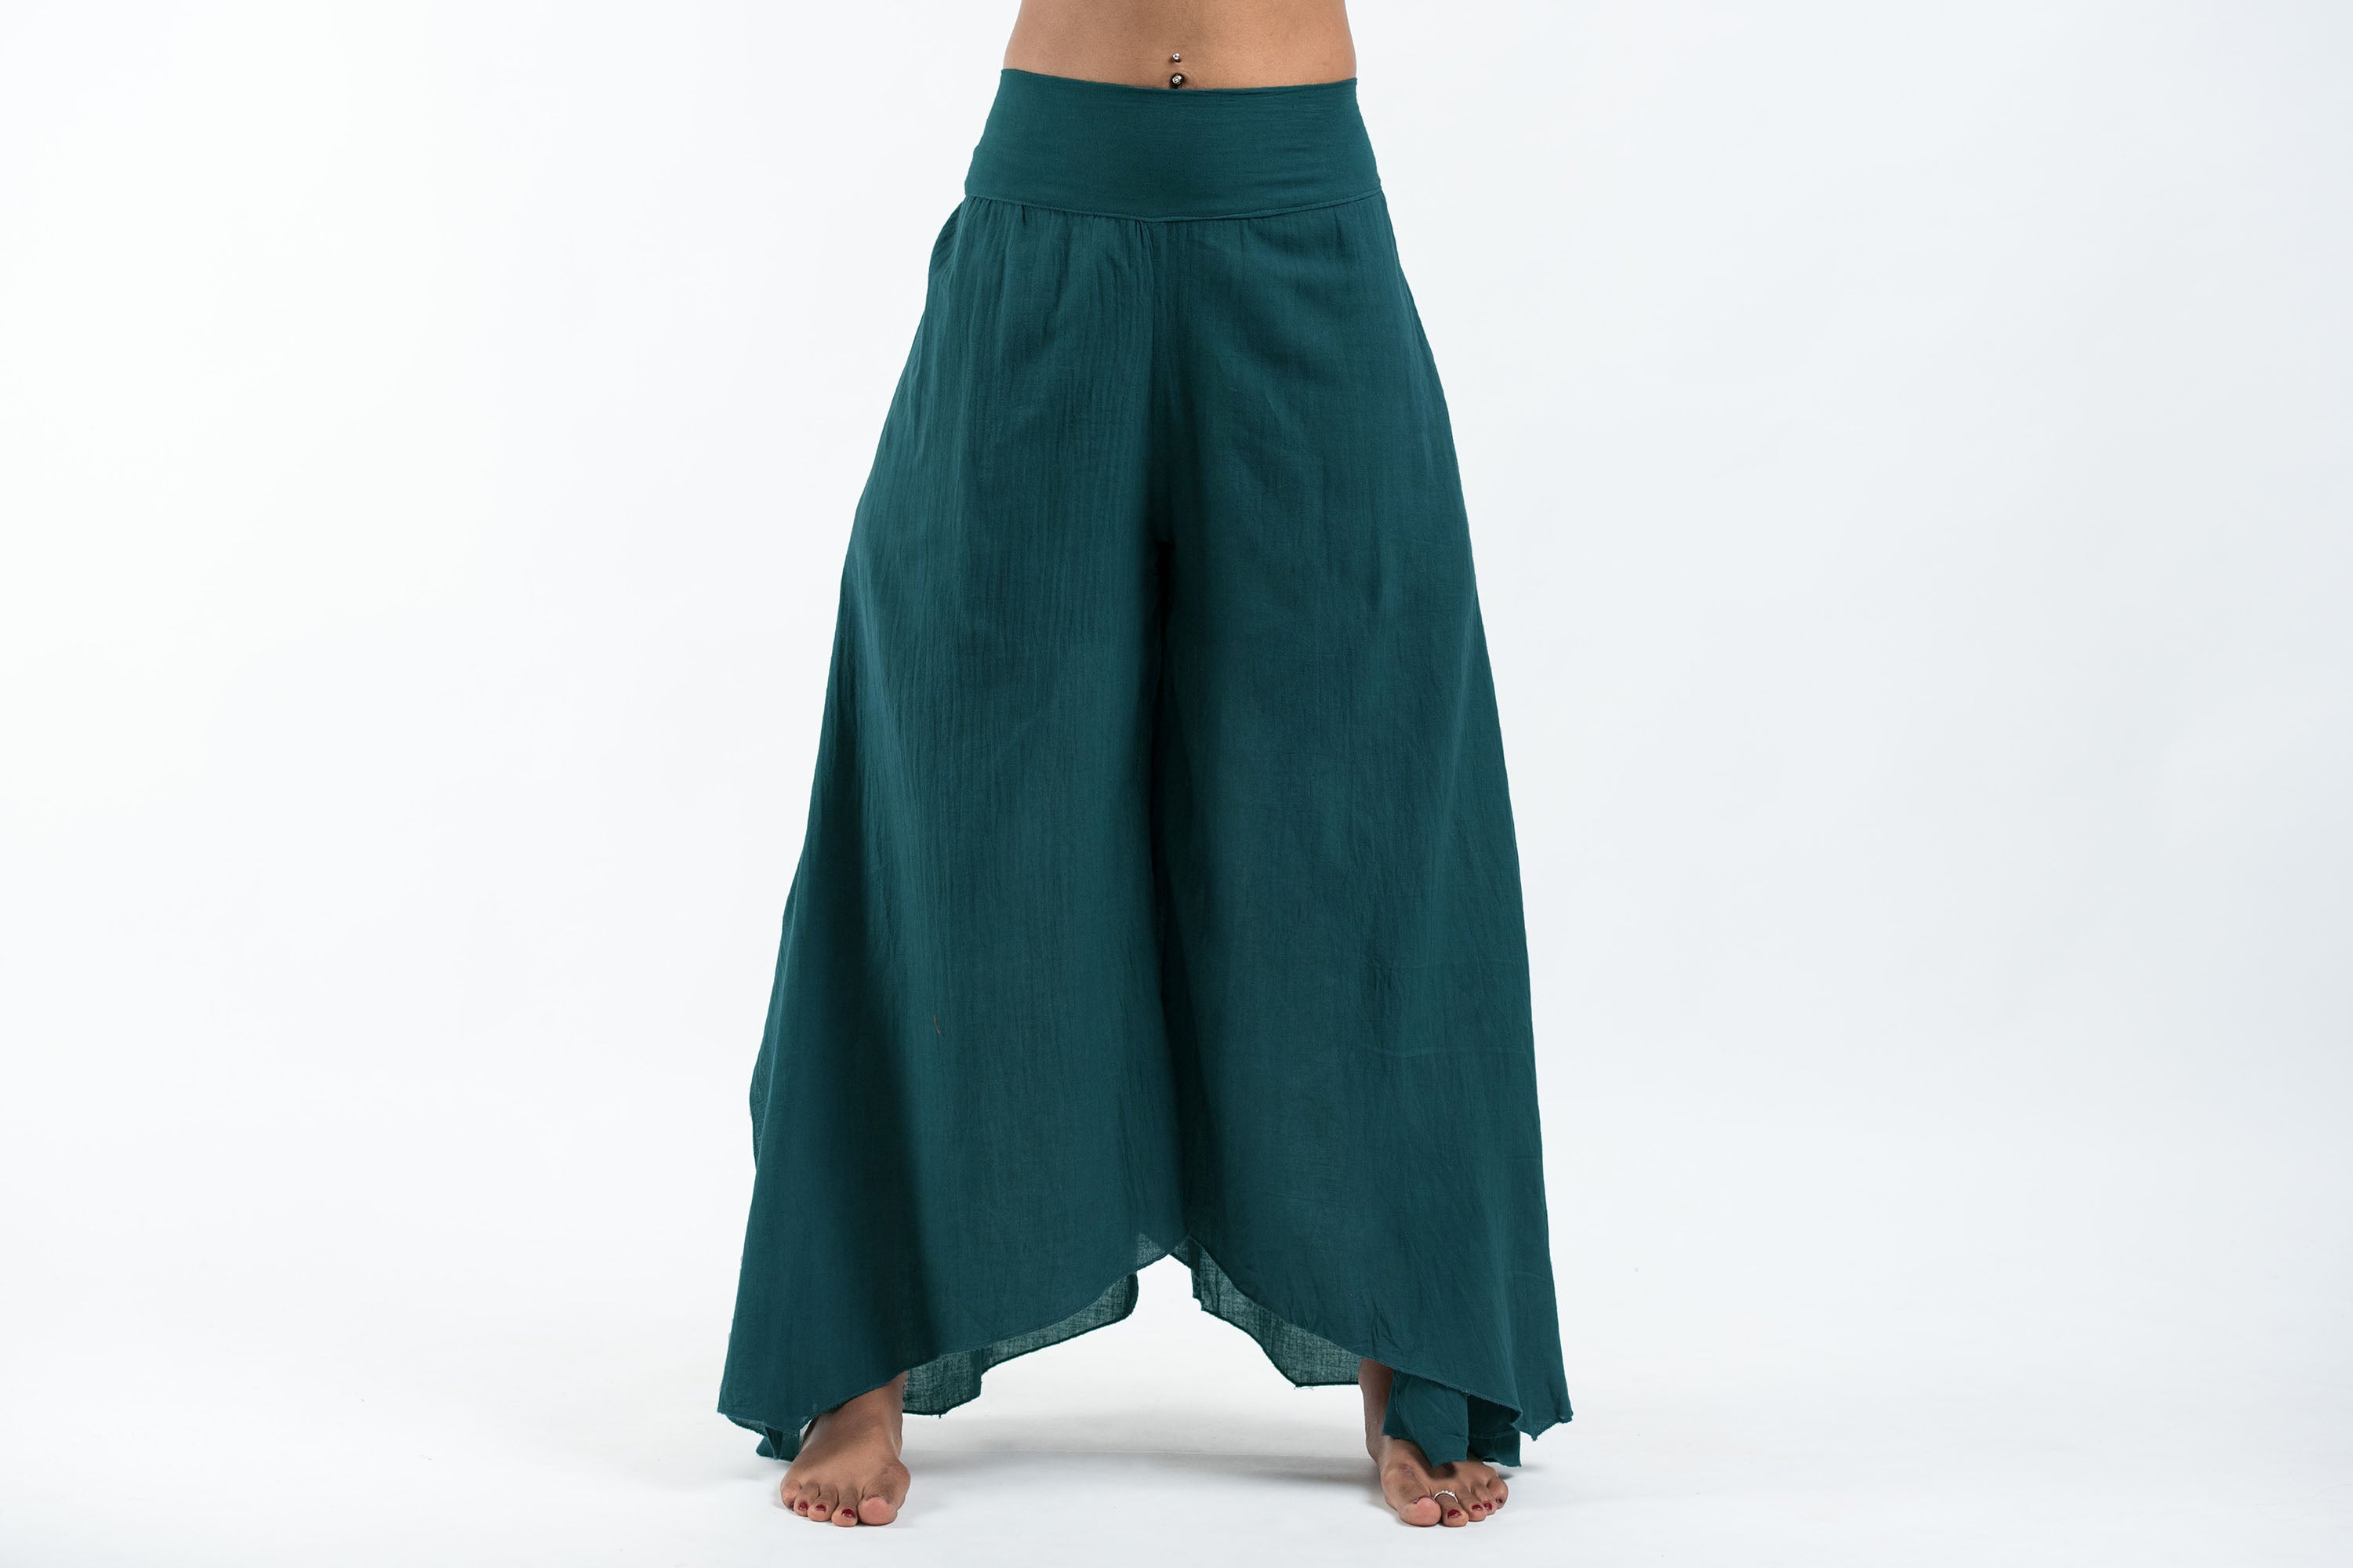 Women's Cotton Tinkerbell Palazzo Pants in Teal – Harem Pants